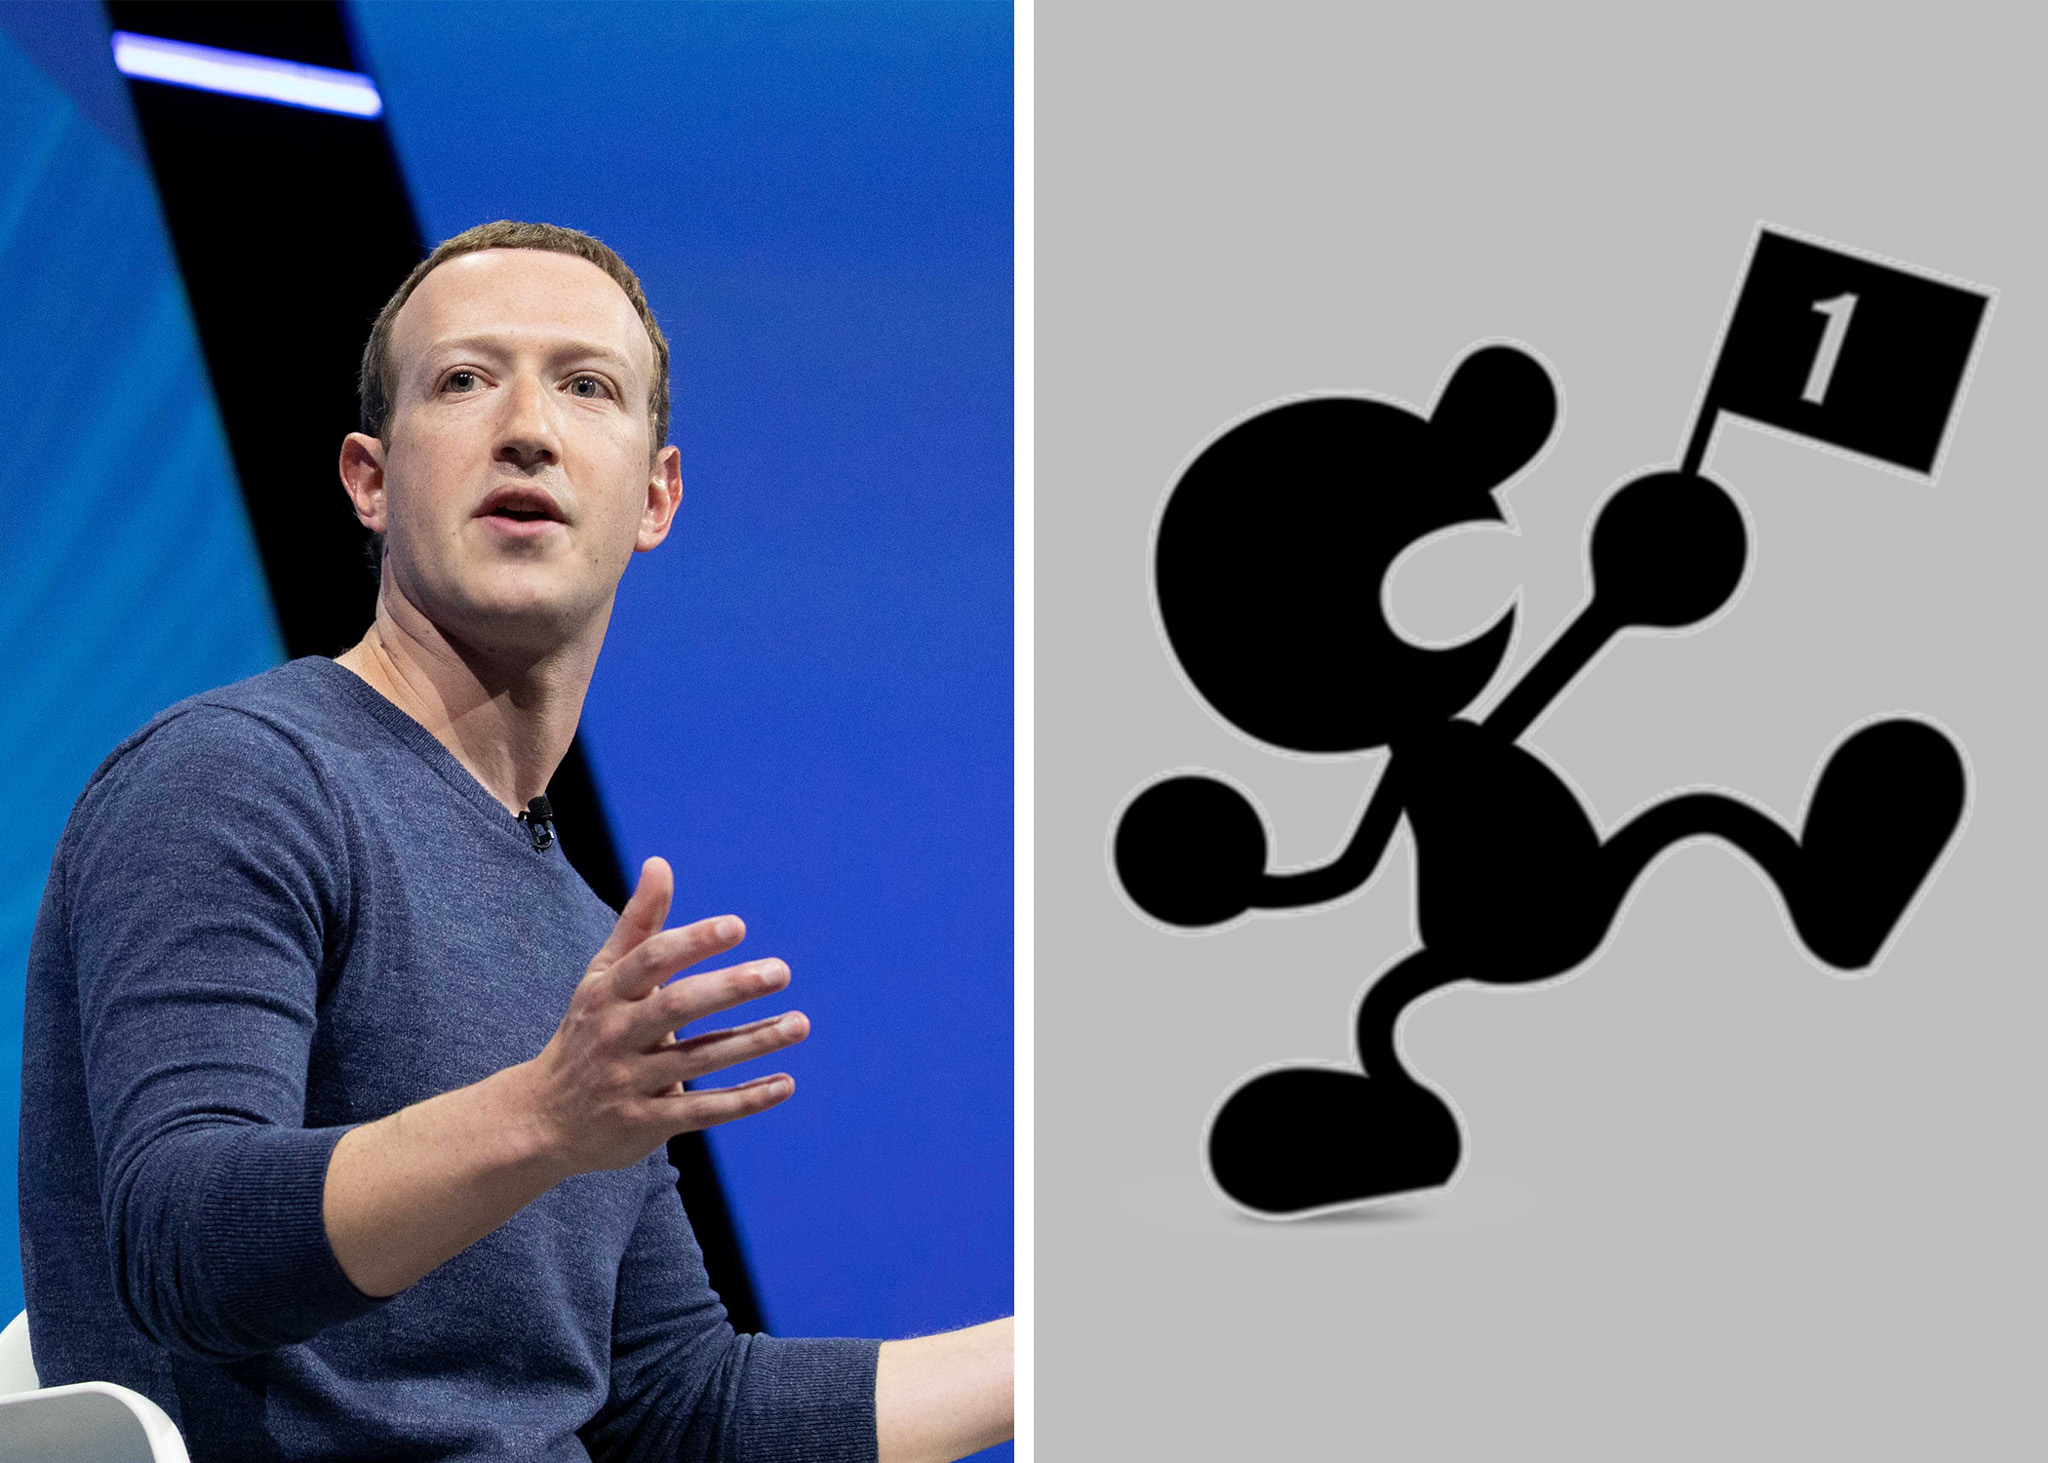 The image is split into two parts: the left shows a man in a blue shirt speaking, while the right depicts the black silhouette of a cartoonish figure holding a flag with the number 1.